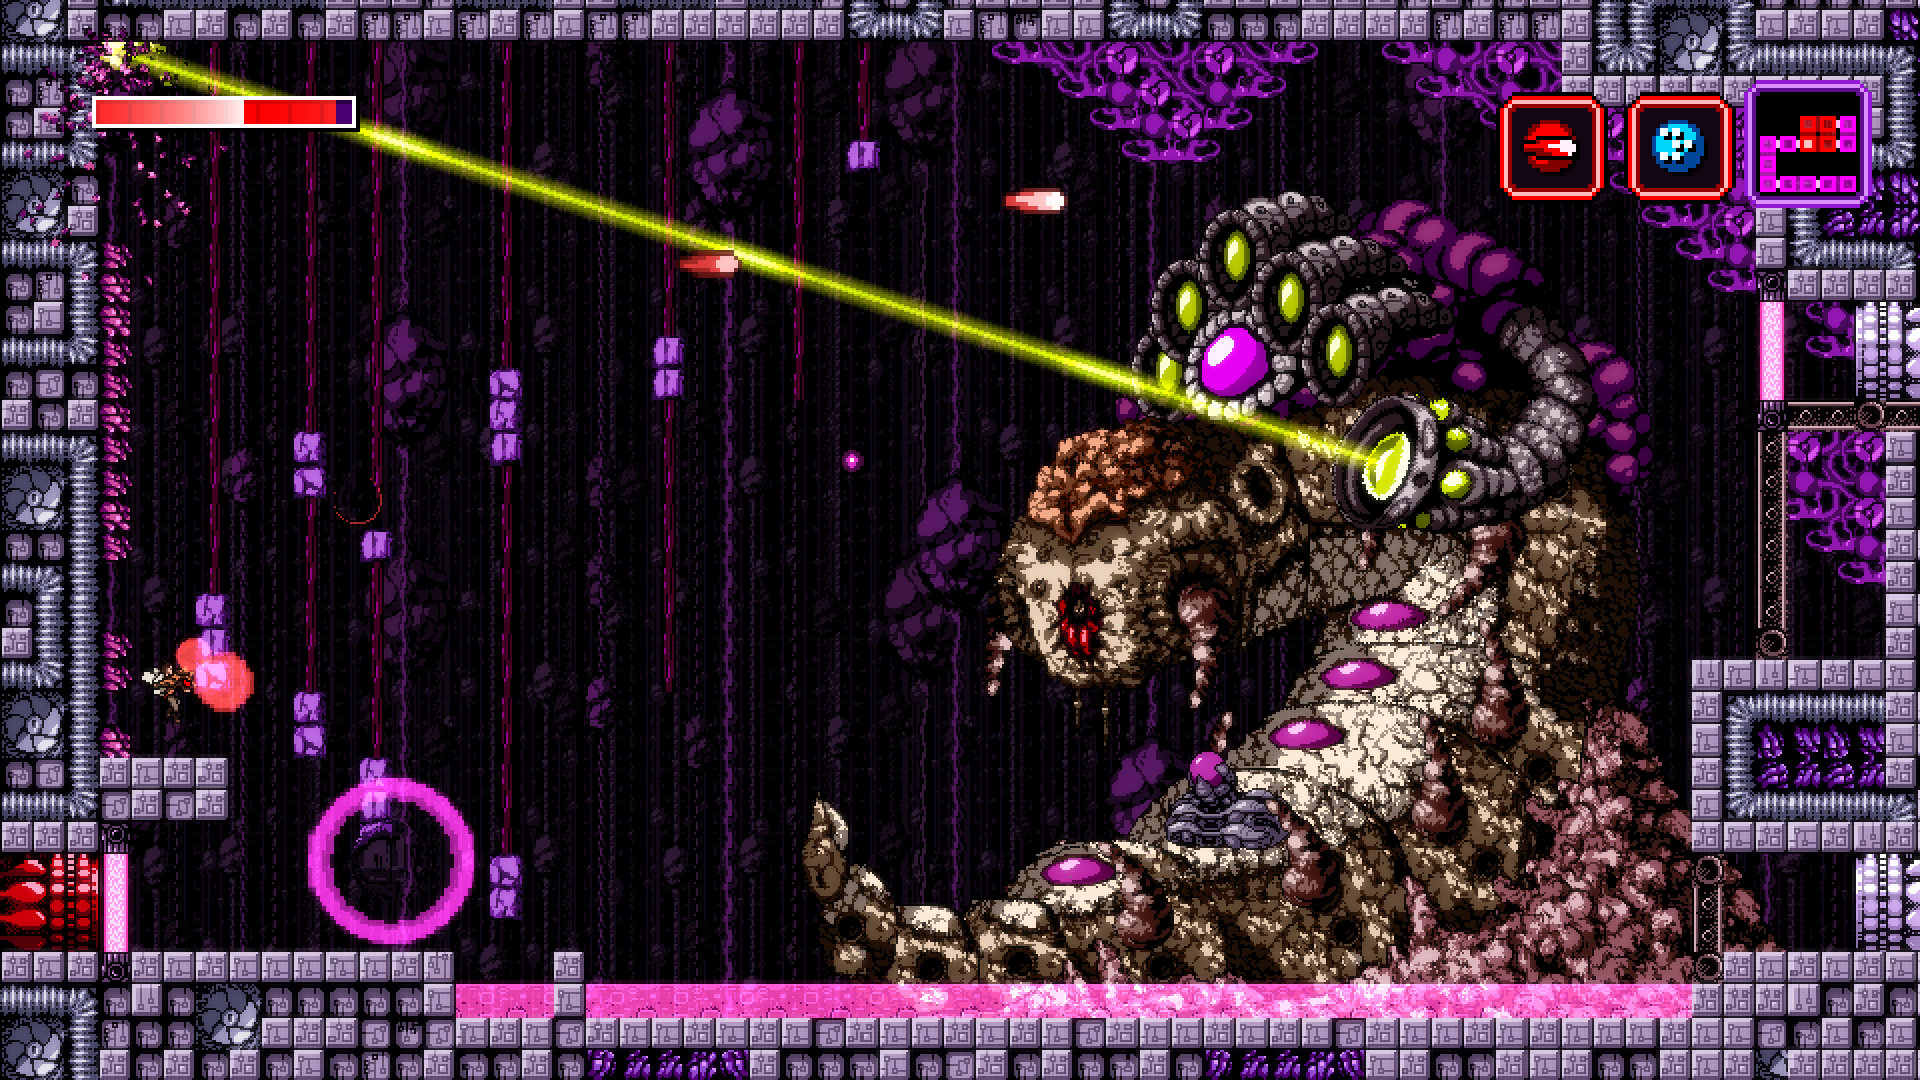 Axiom Verge Backgrounds, Compatible - PC, Mobile, Gadgets| 1920x1080 px